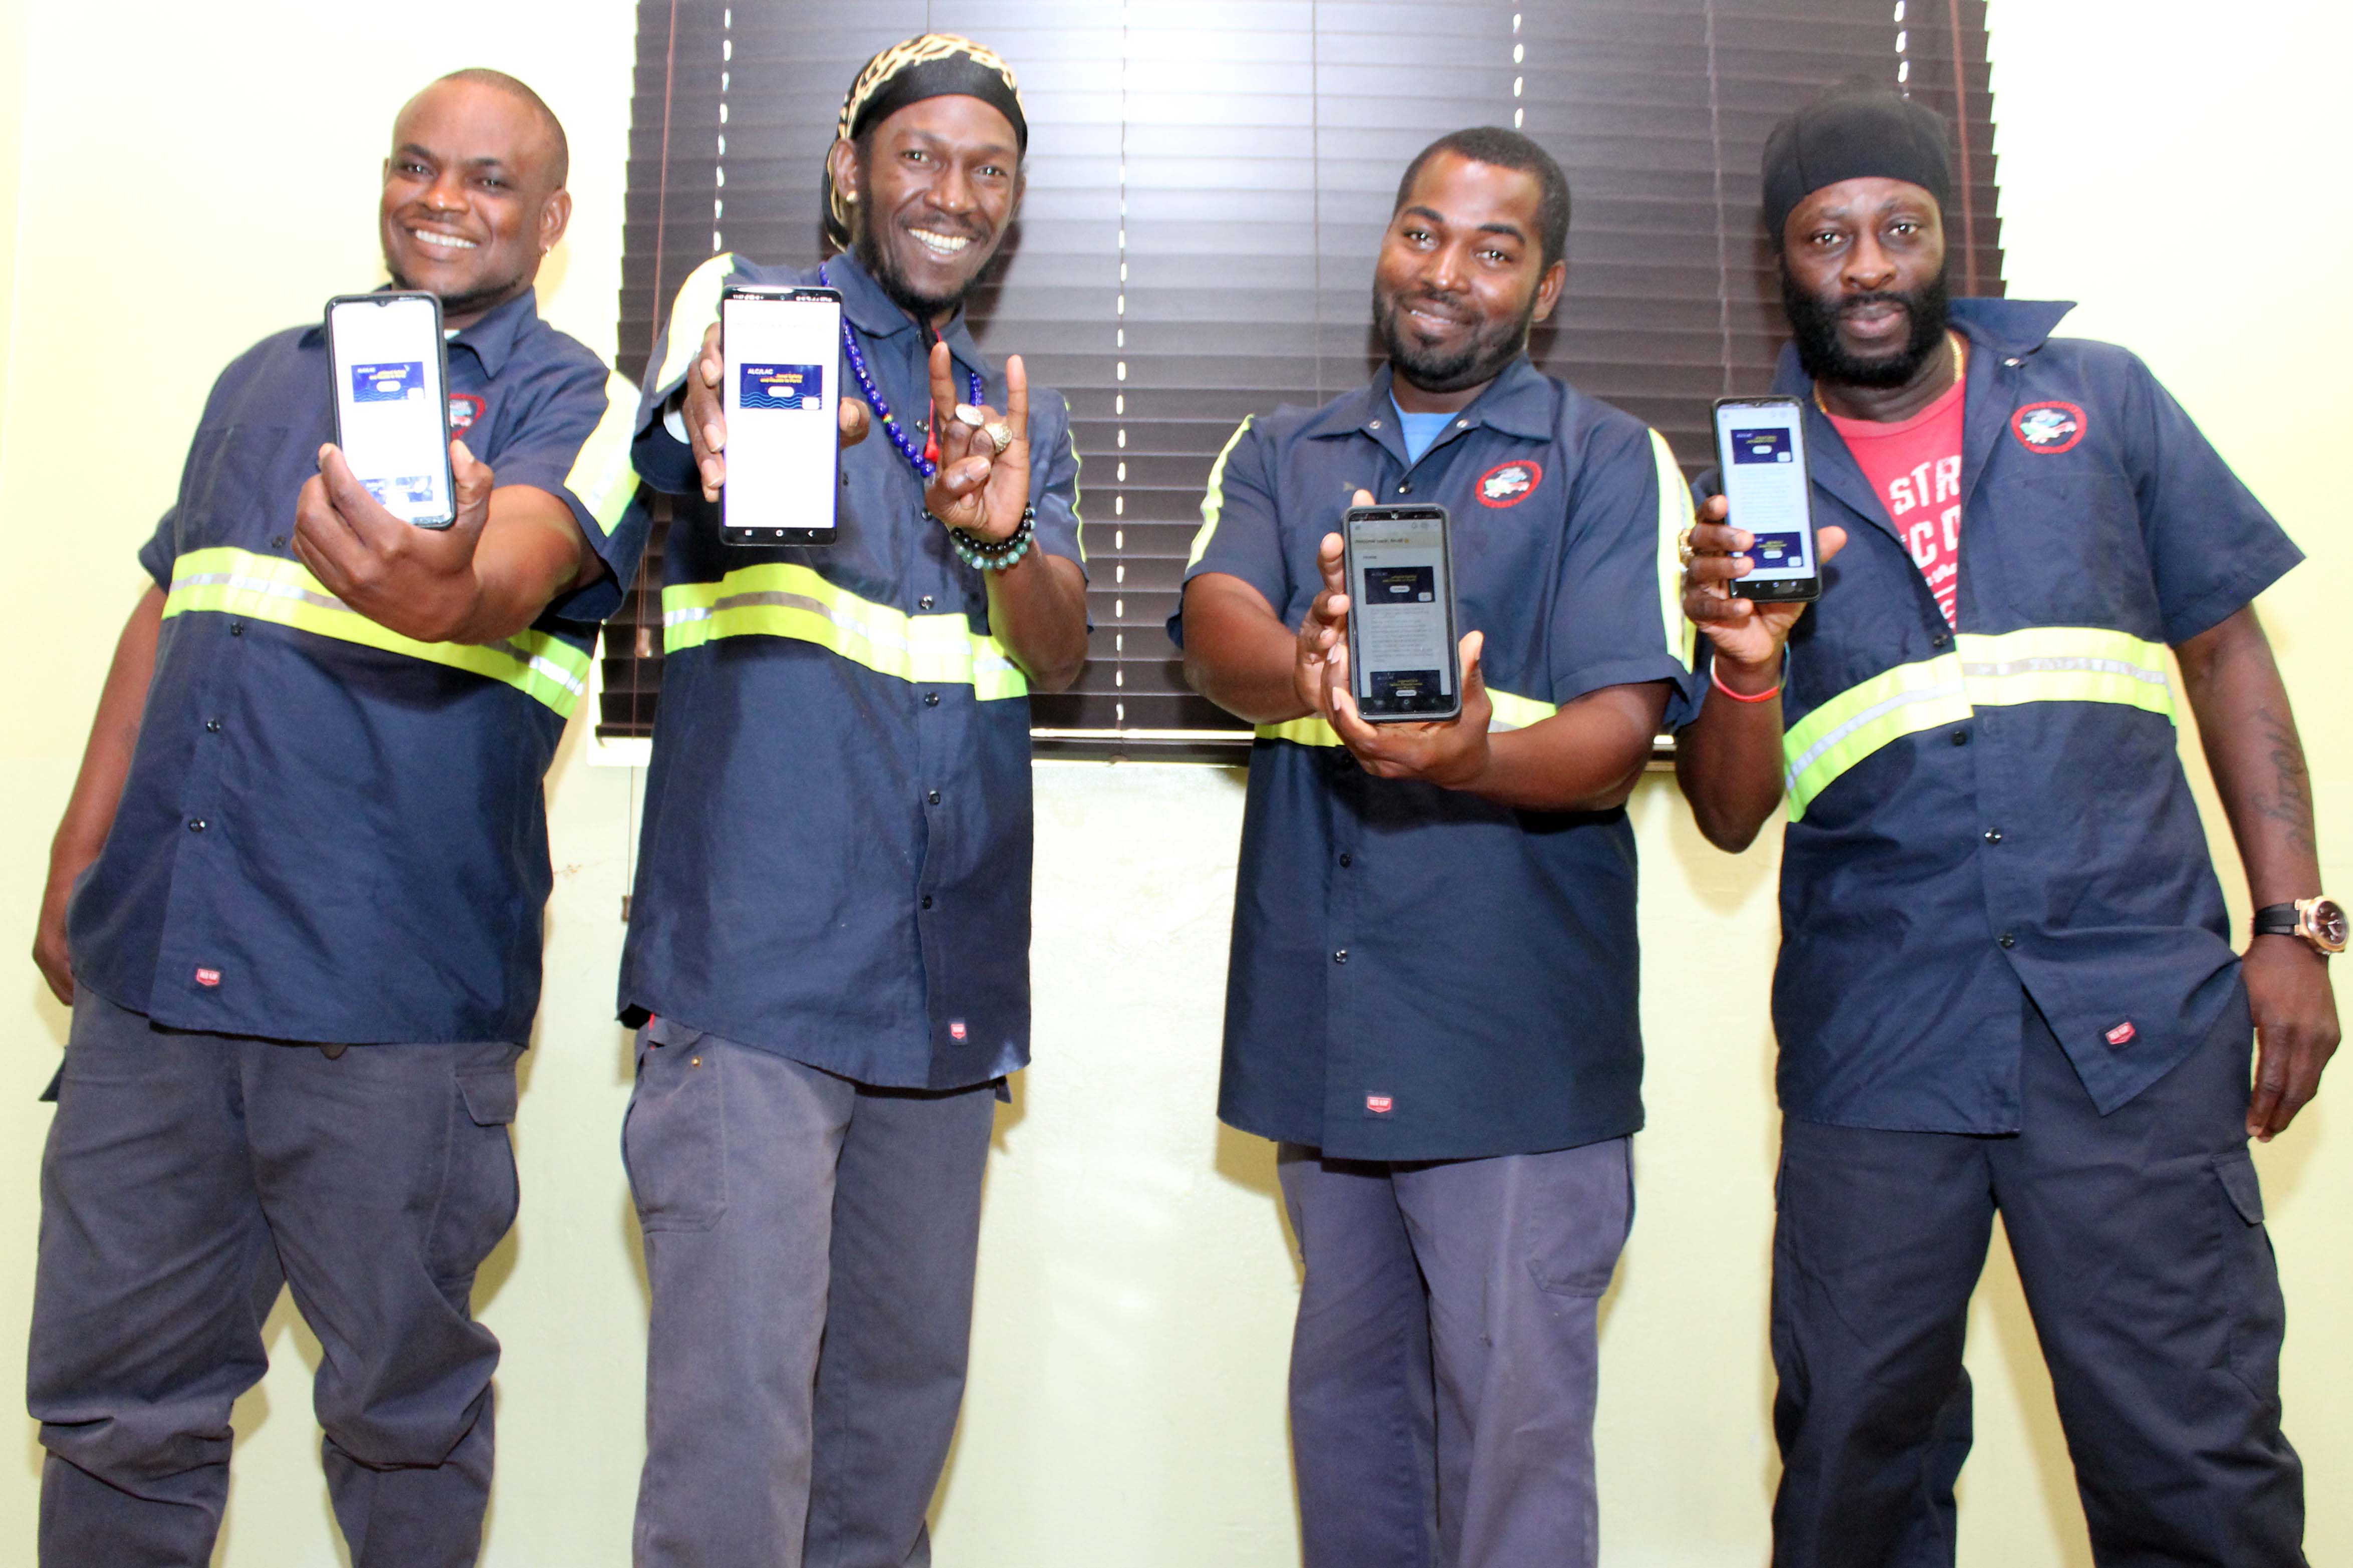 ABWU Facilitates Health and Safety Training for Port Workers Using App